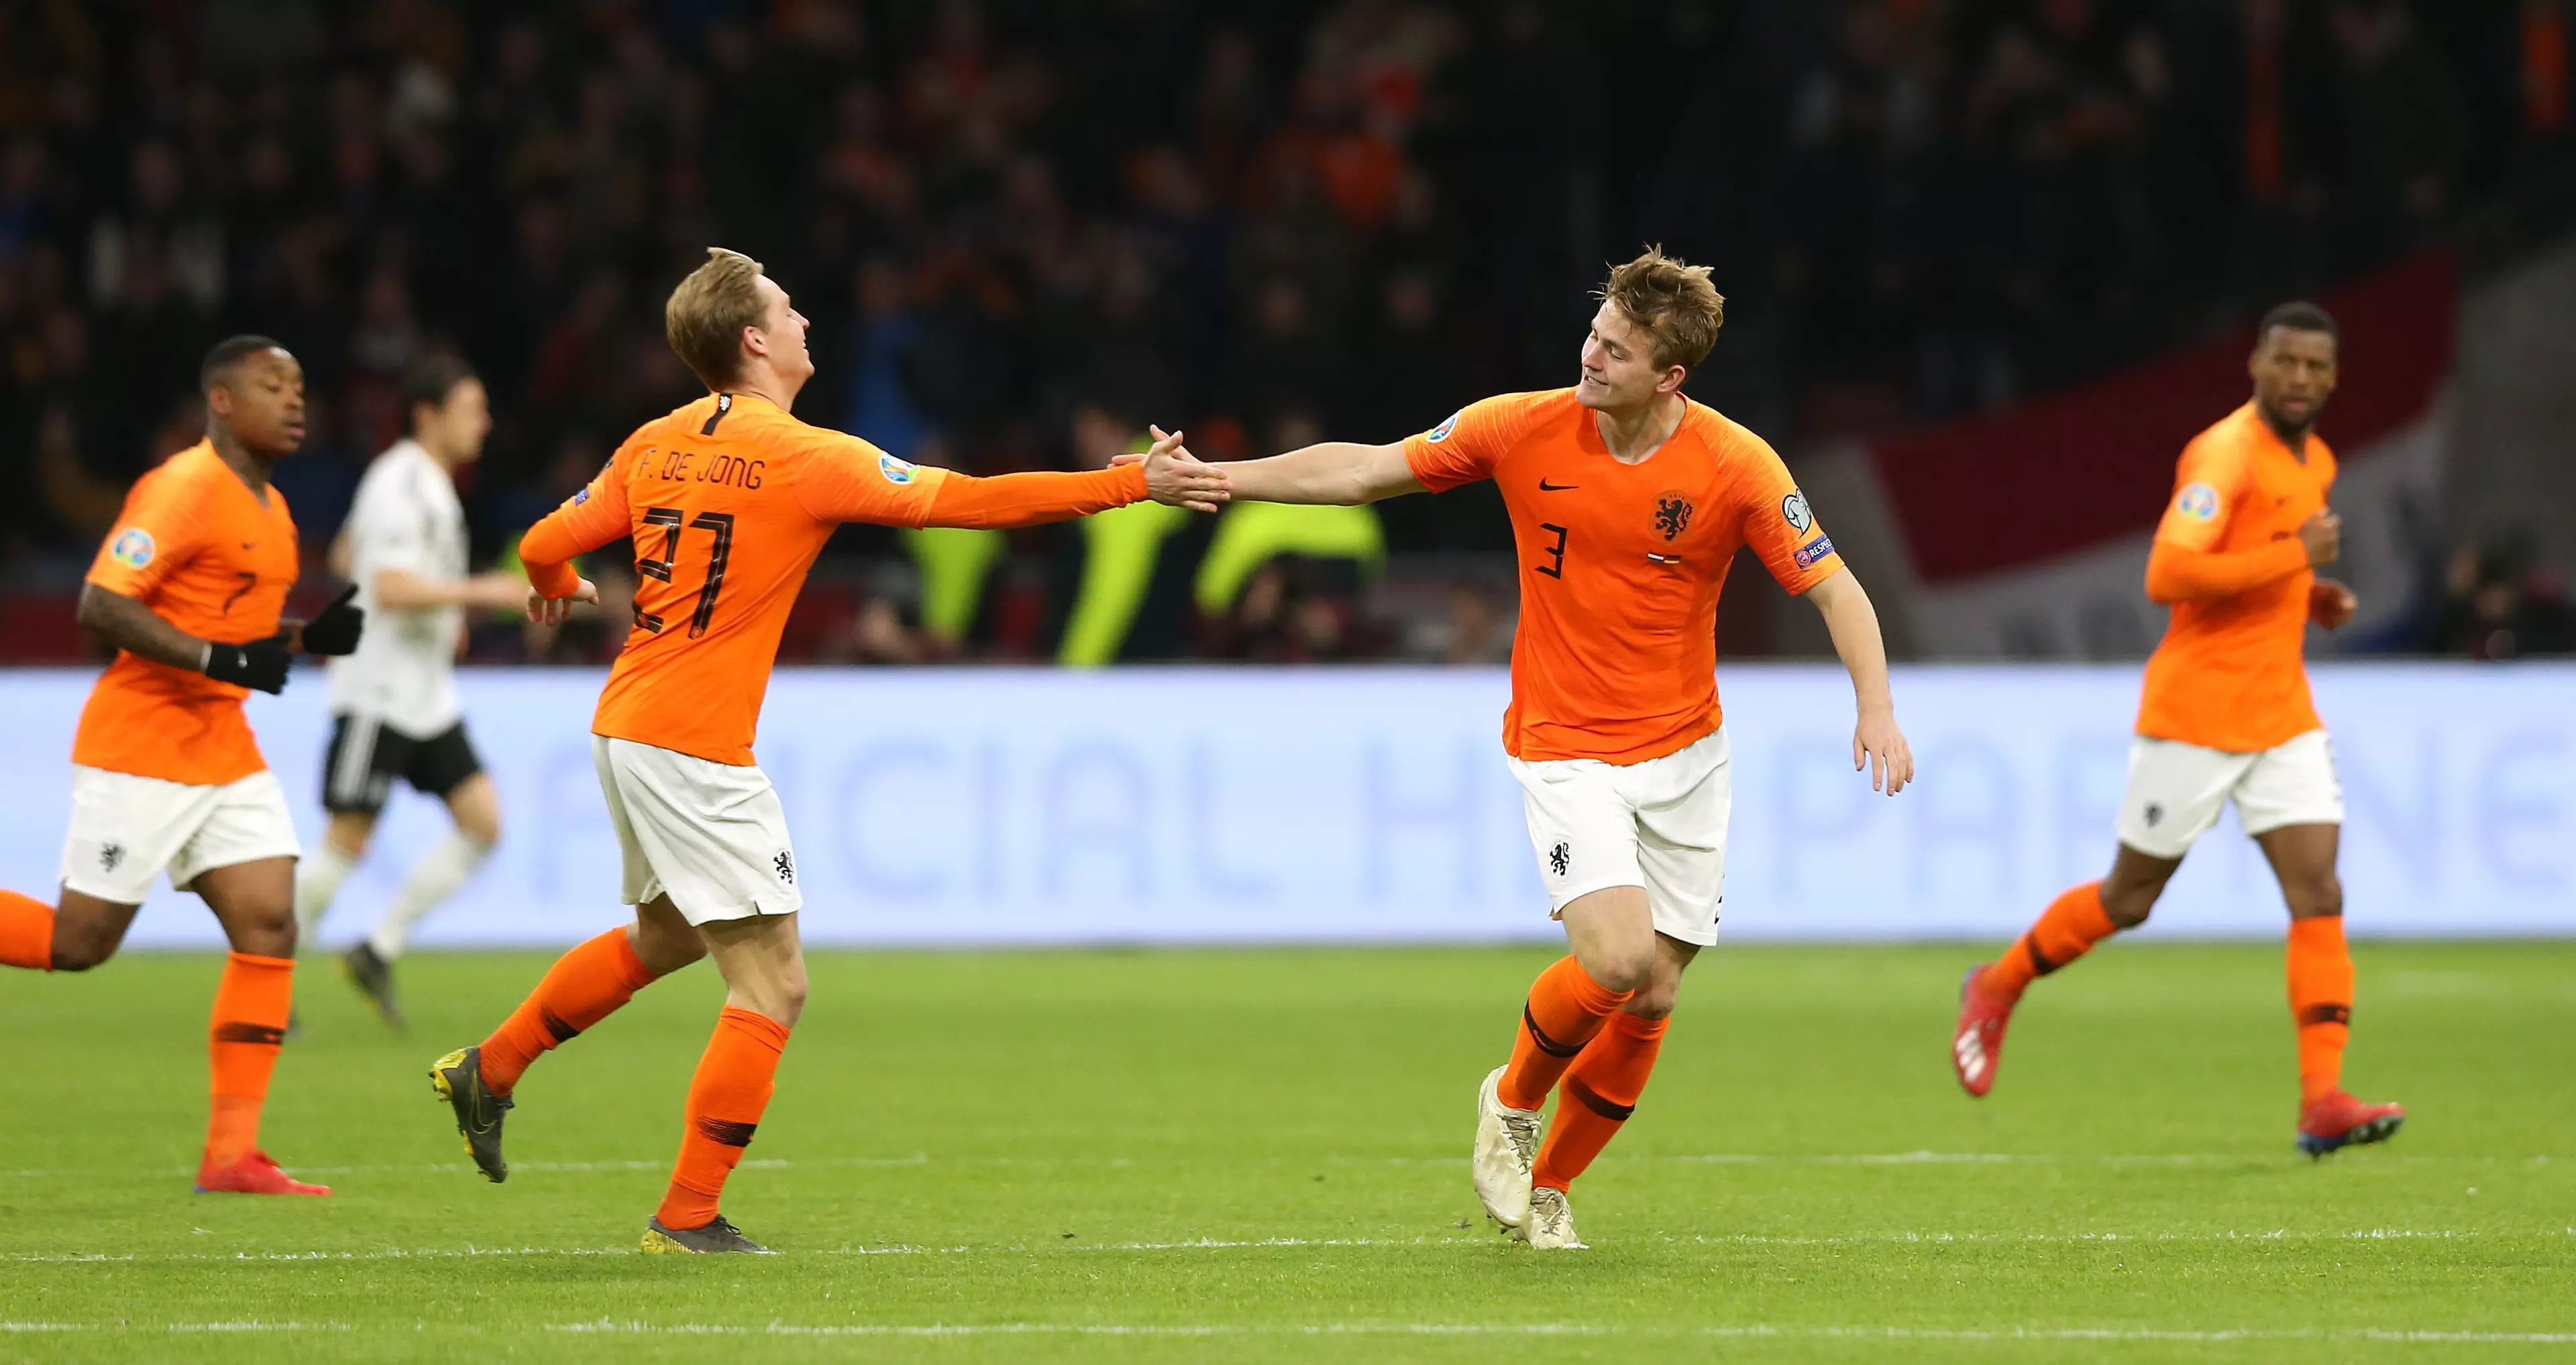 De Jong and De Ligt could soon be together at the Camp Nou. Image: PA Images